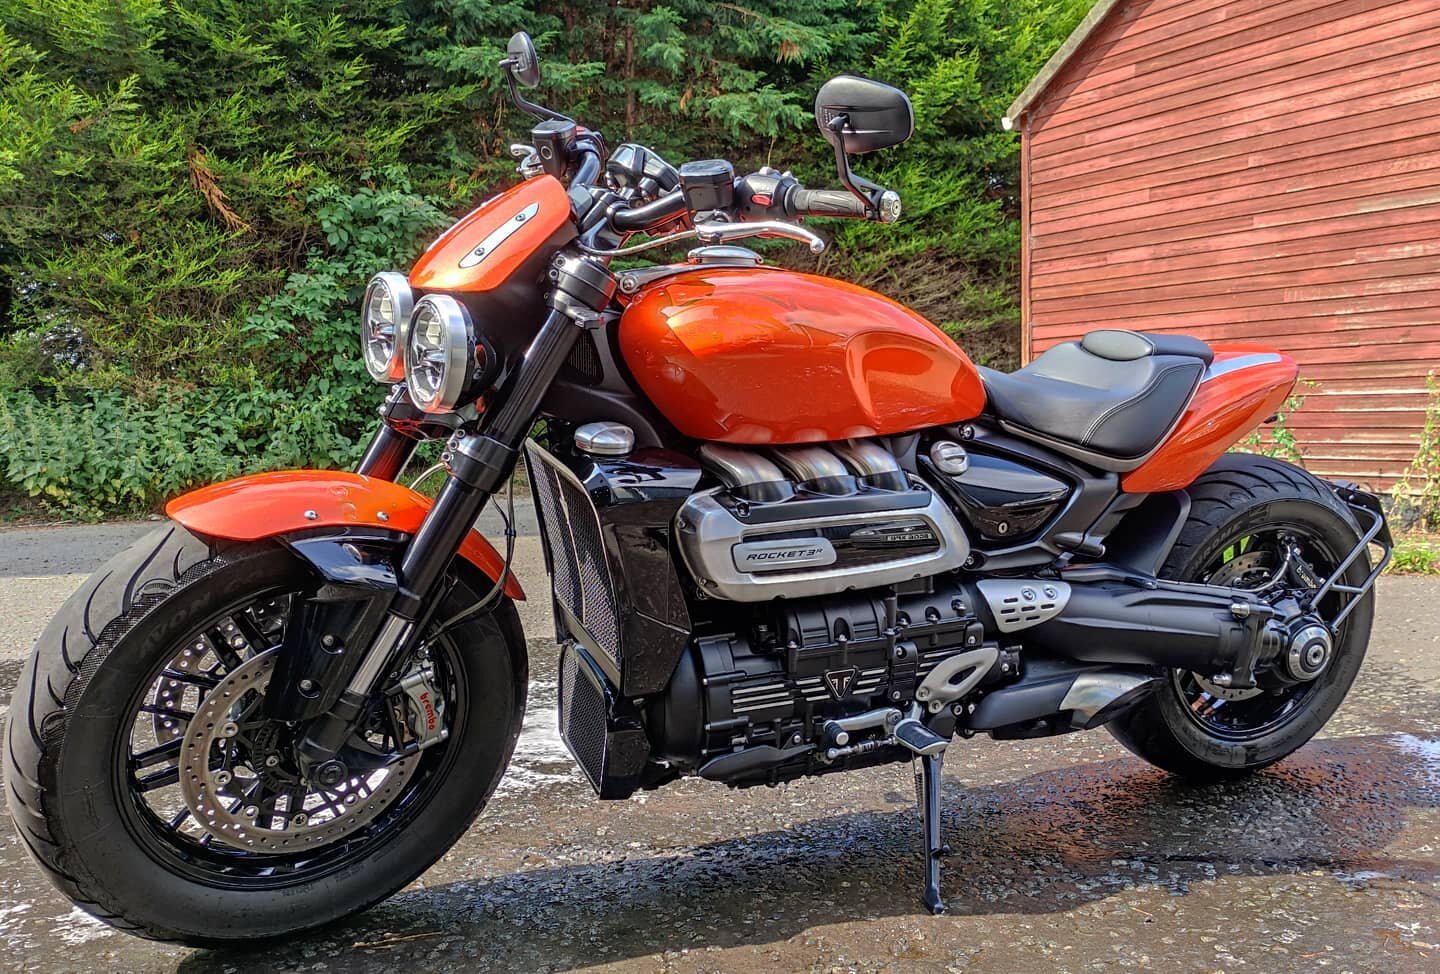 This custom triumph rocket 3 is an absolute monster, with matt black and pearl orange.
.
.
.
.
.
#triumphrocket3 #rocket3#triumphuk #triumph_classics #triumphmotorcycle#custombike #customrocket  #triumphspecial #customtriumph #oneoff #triumphista#mot